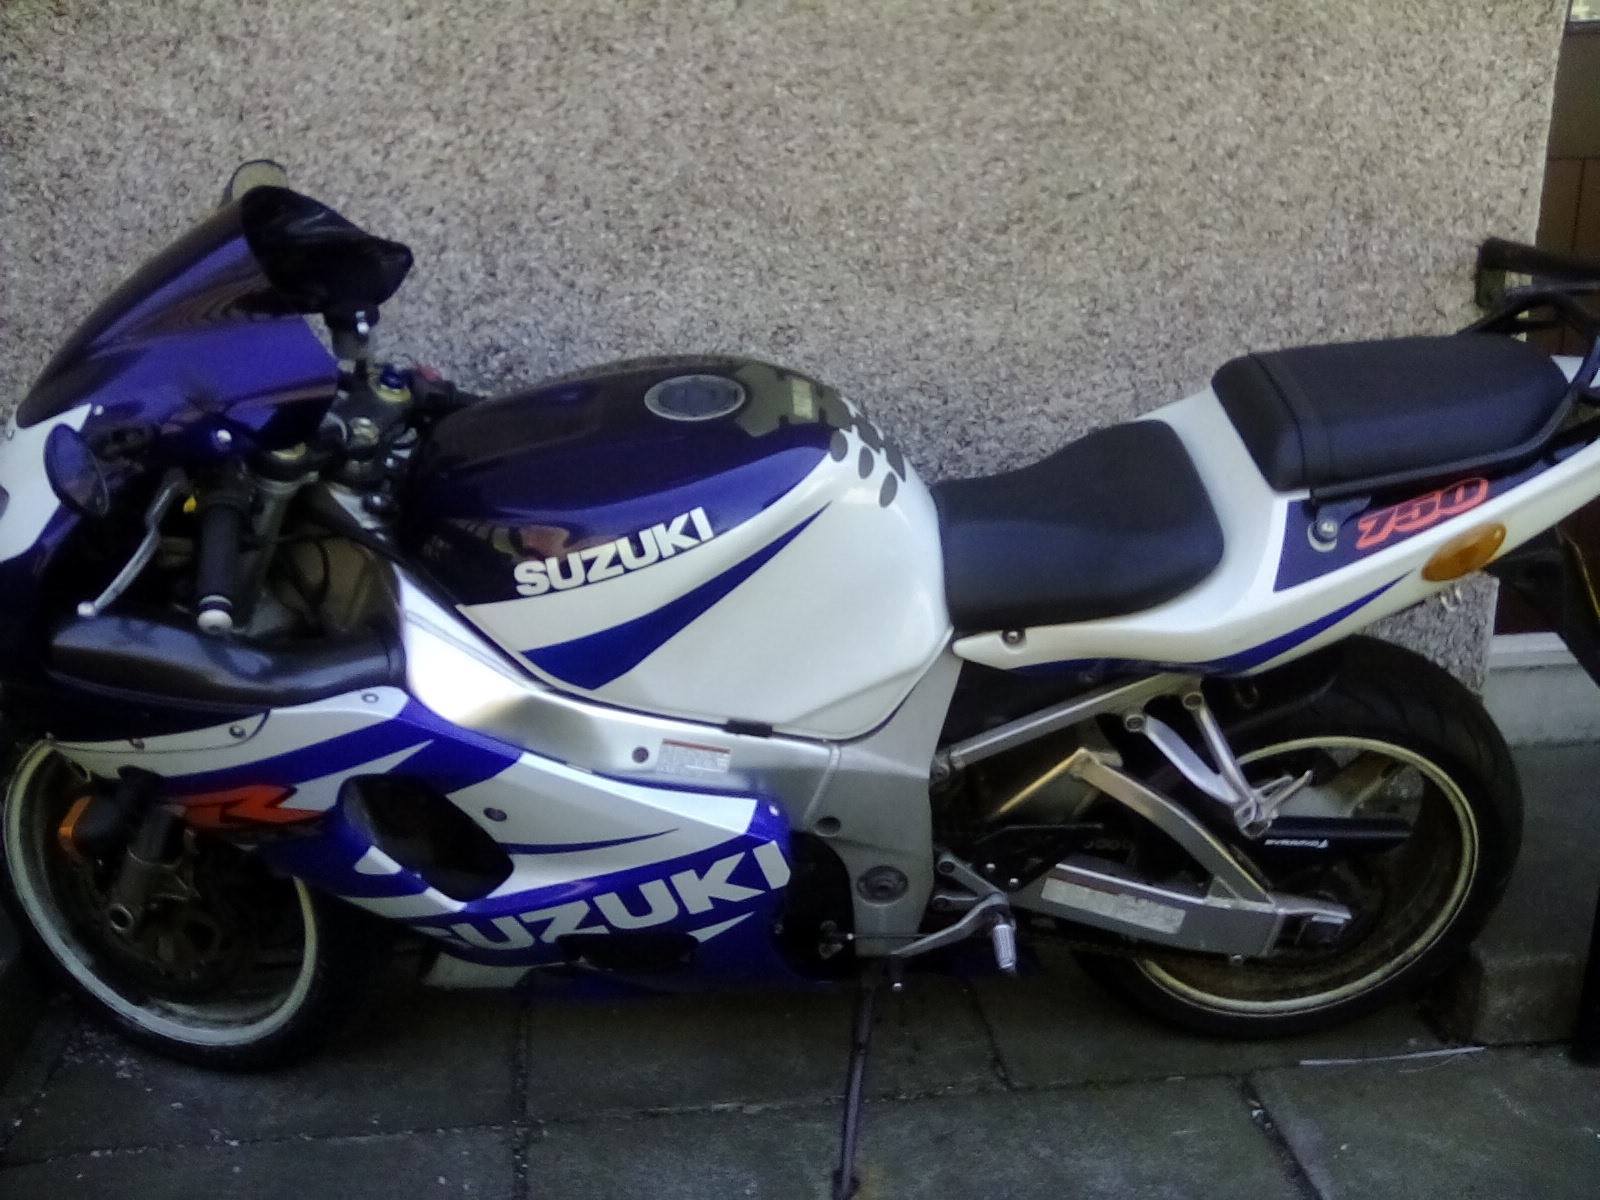 The motorbike was stolen from Elm Brae car park in Arbroath